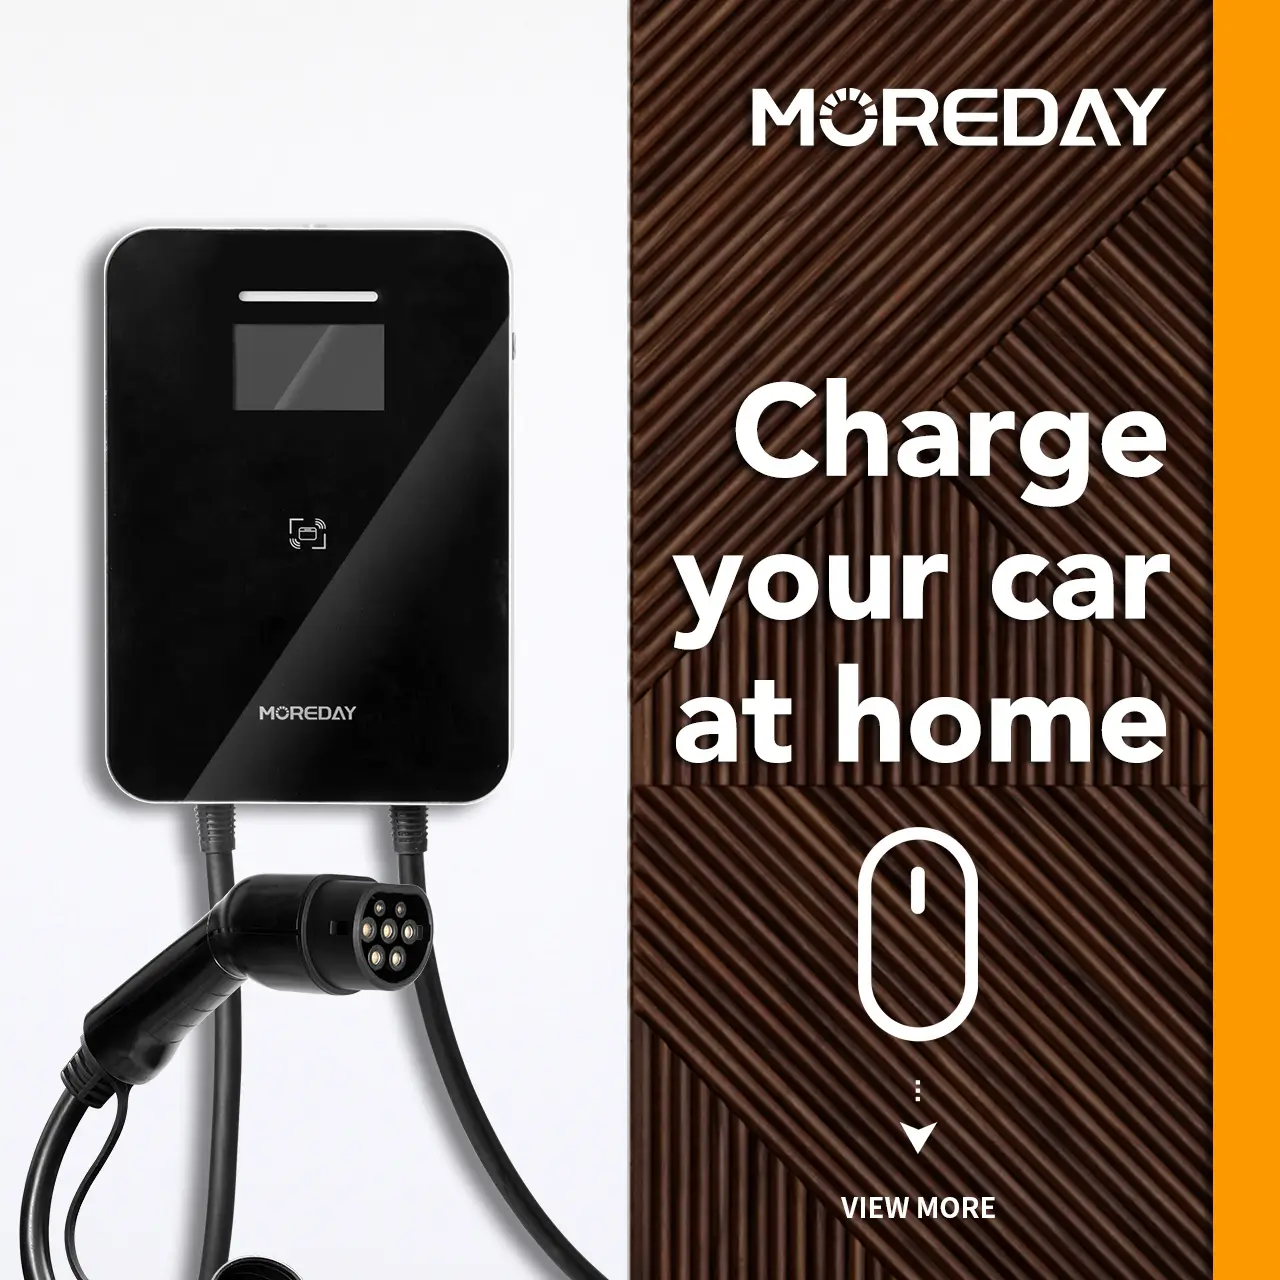 Charge your car at home